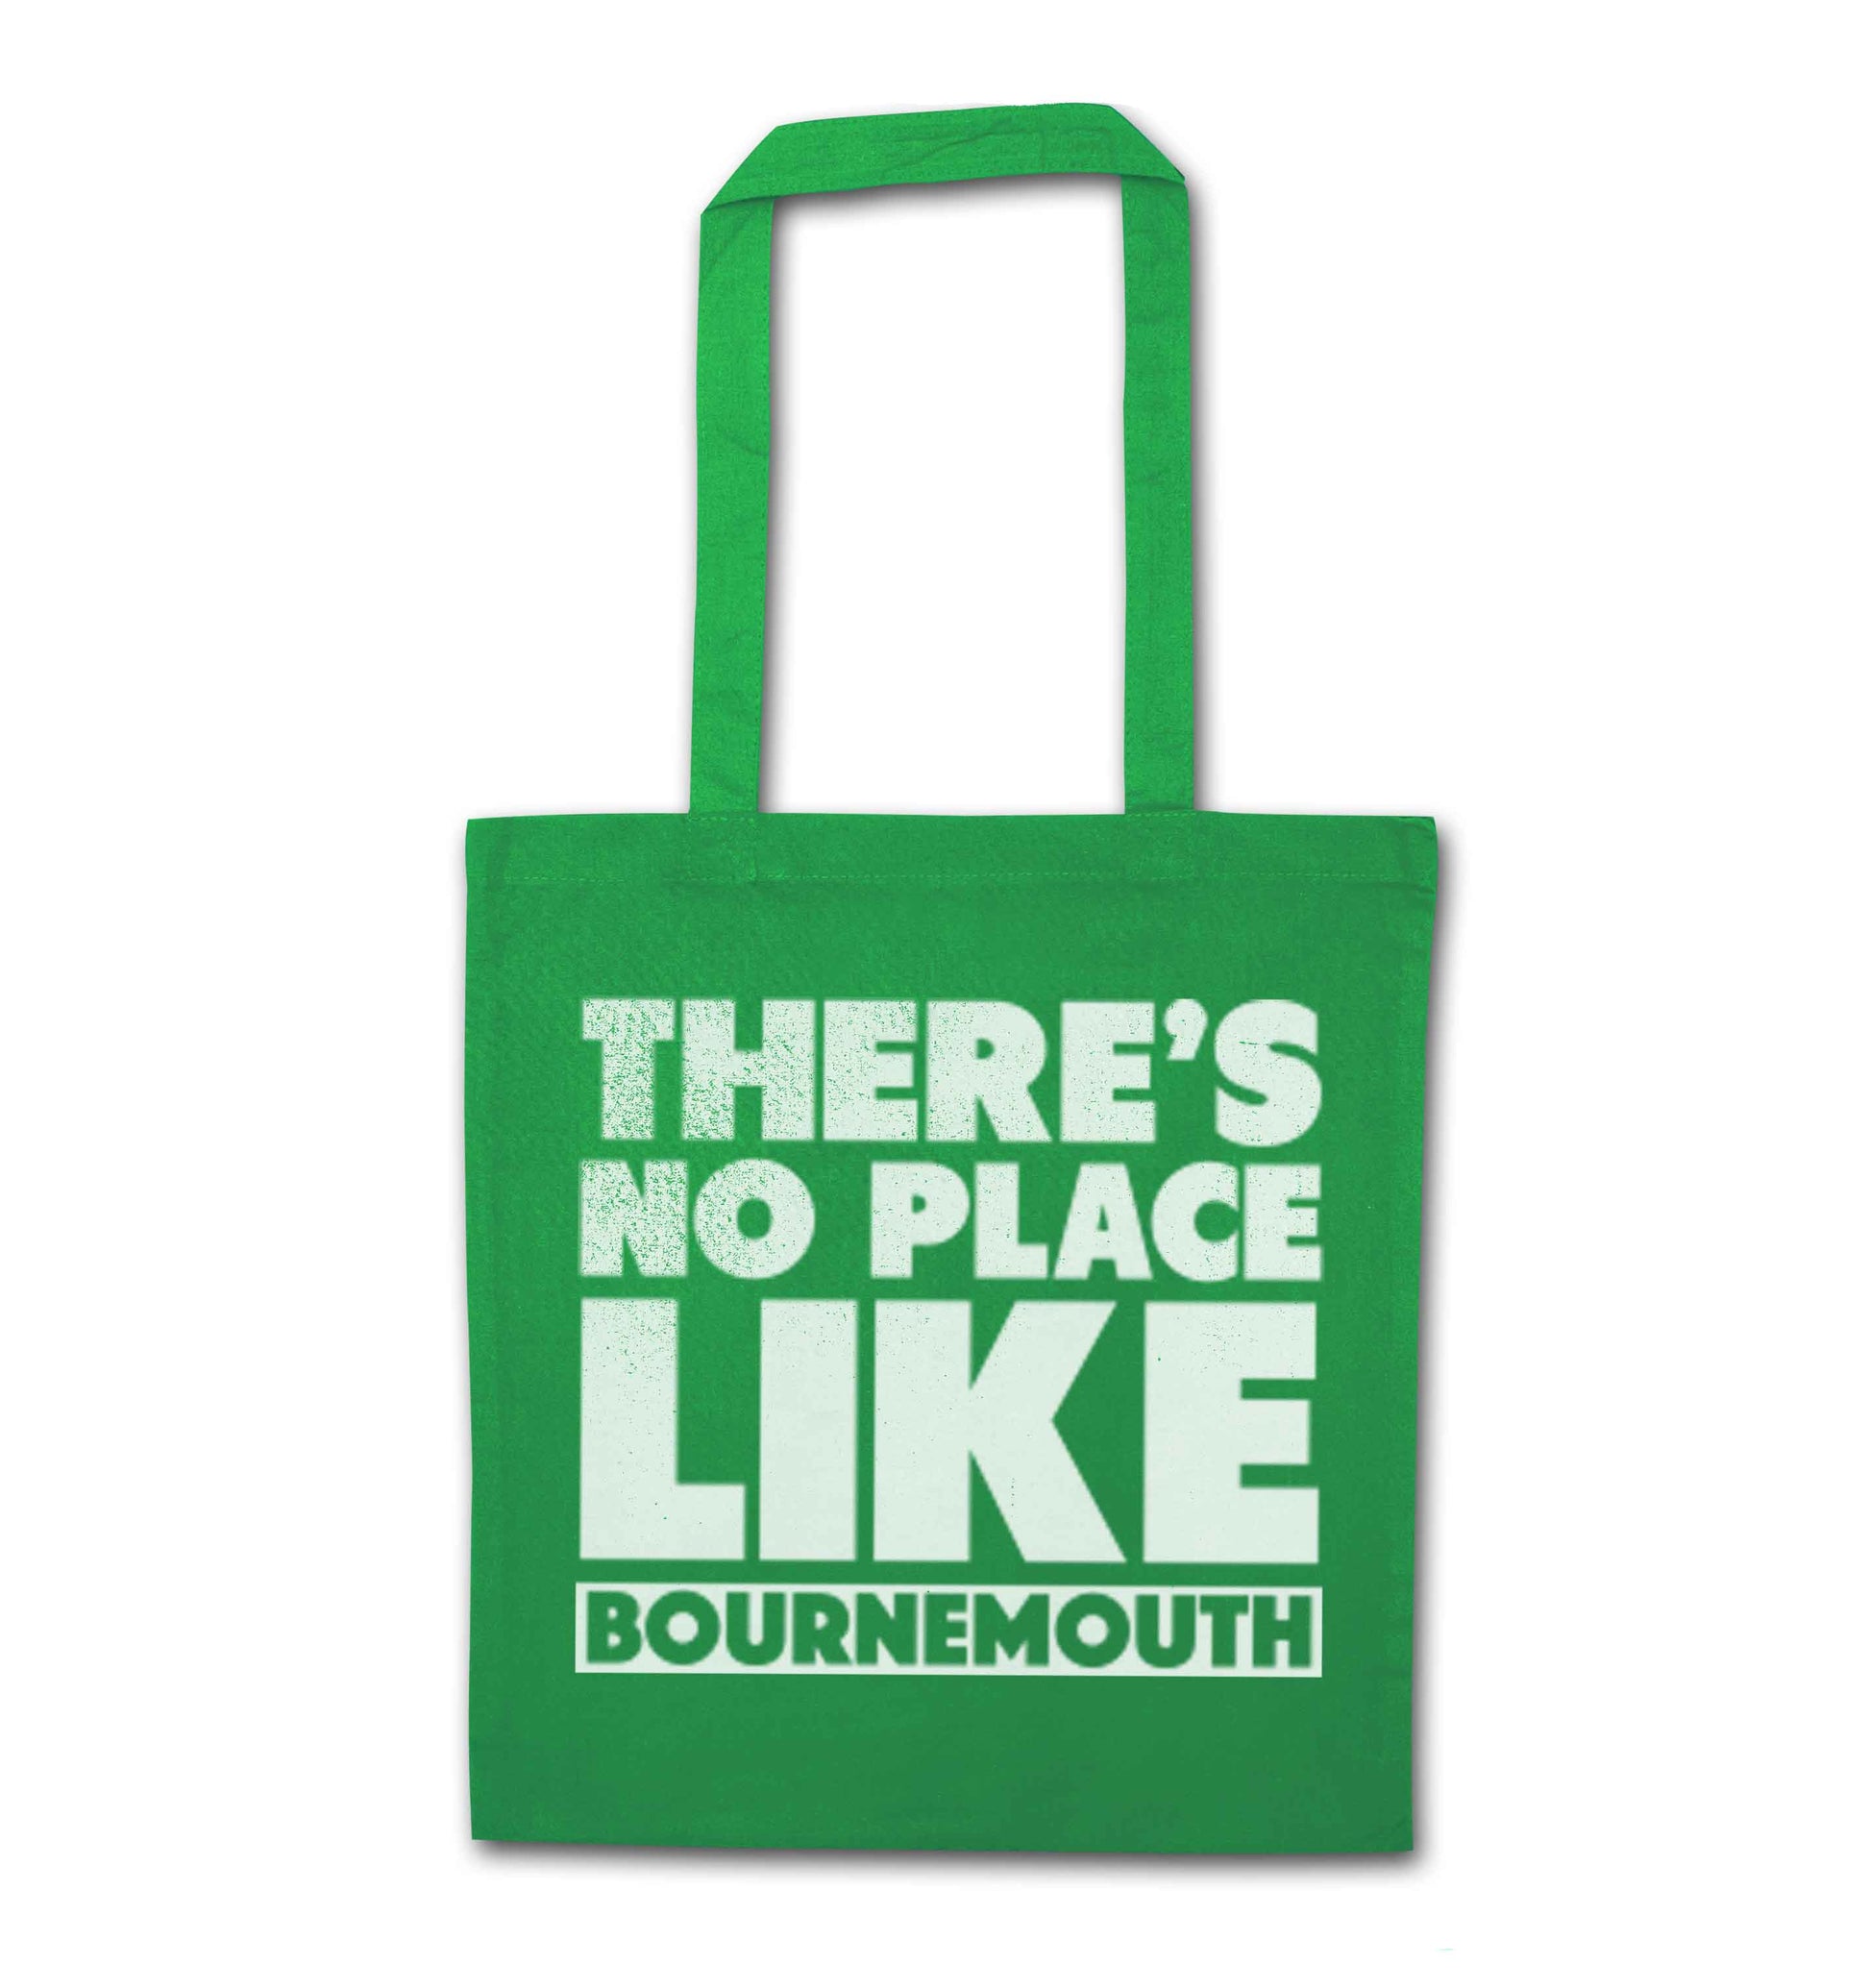 There's no place like Bournemouth green tote bag